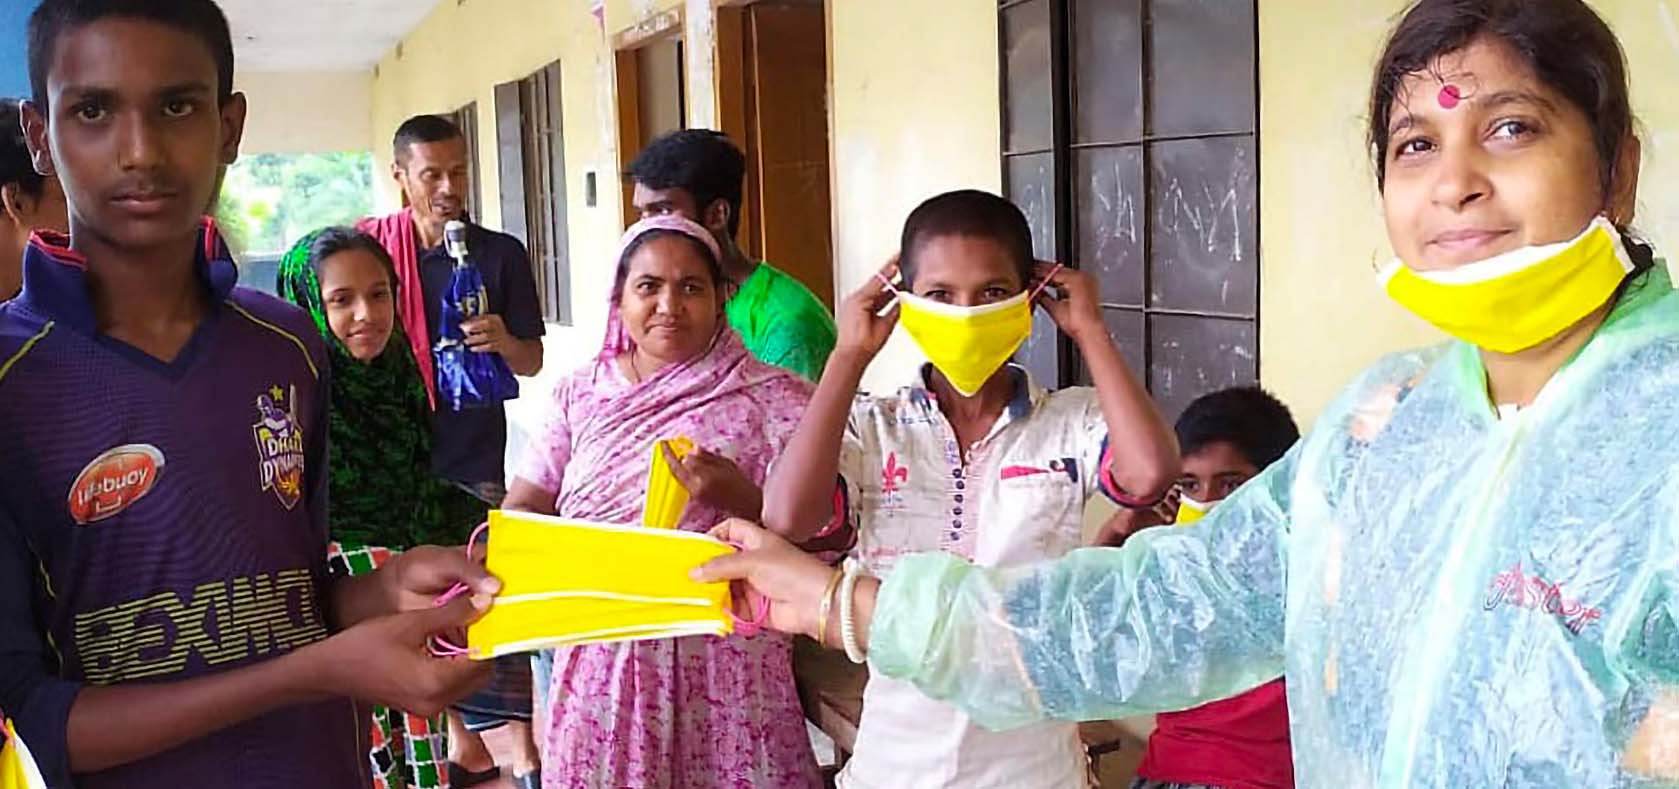 Shampa Goswami (pictured right) and the Prerona team distribute food packets and masks at cyclone shelters in the wake of cyclone Amphan. Photo: Prerona